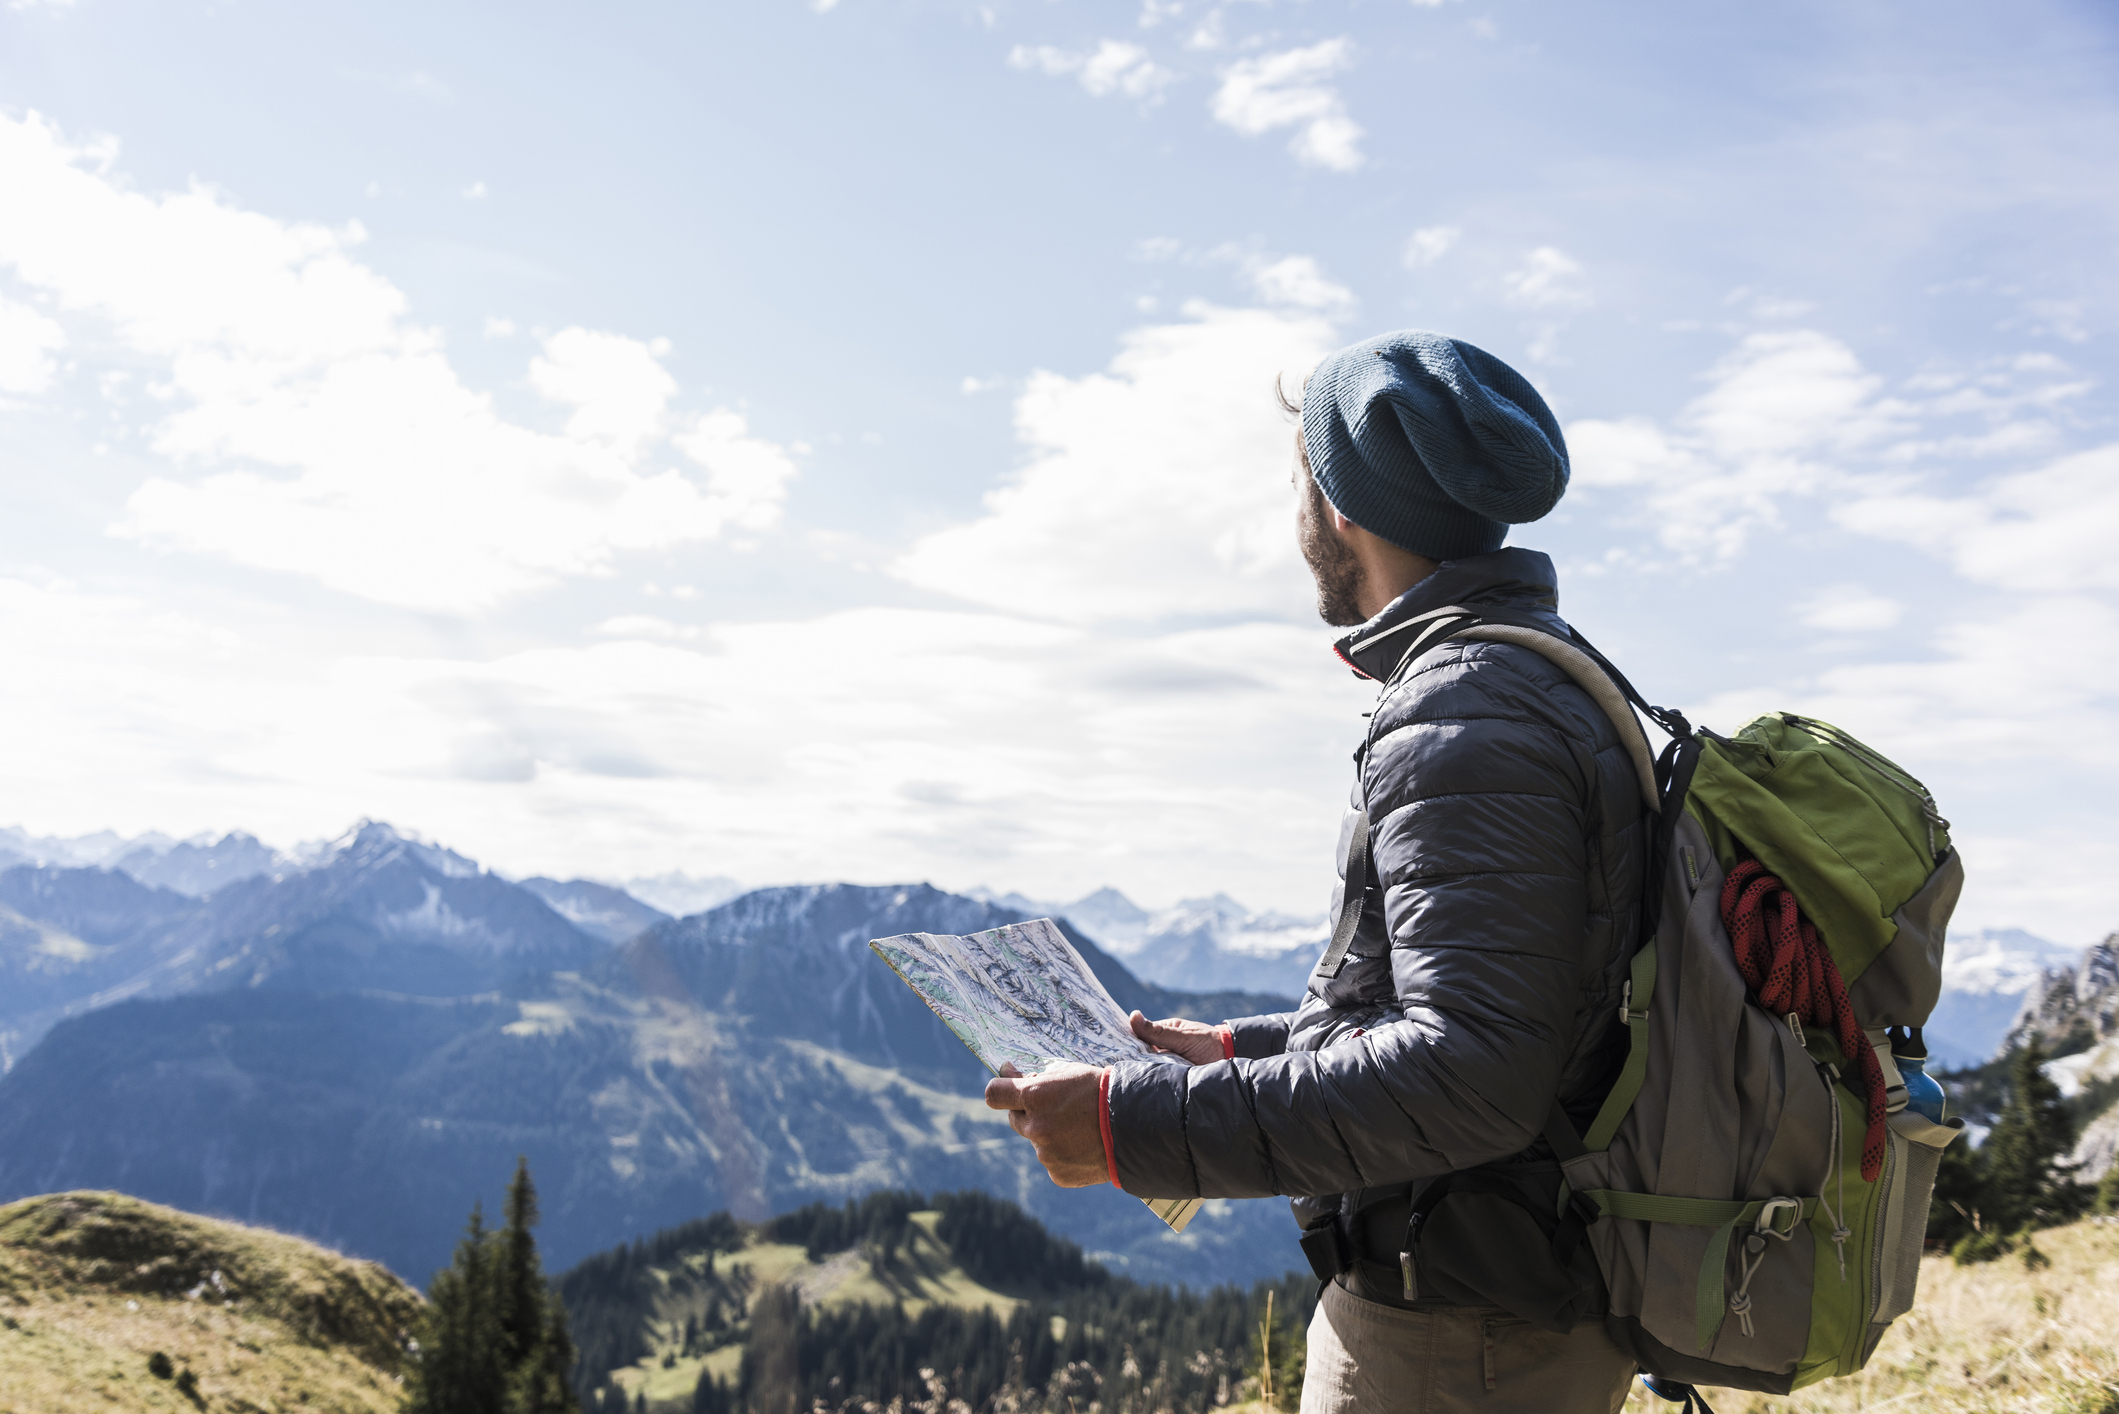 A man enjoying hiking in the mountains with a backpack and map.